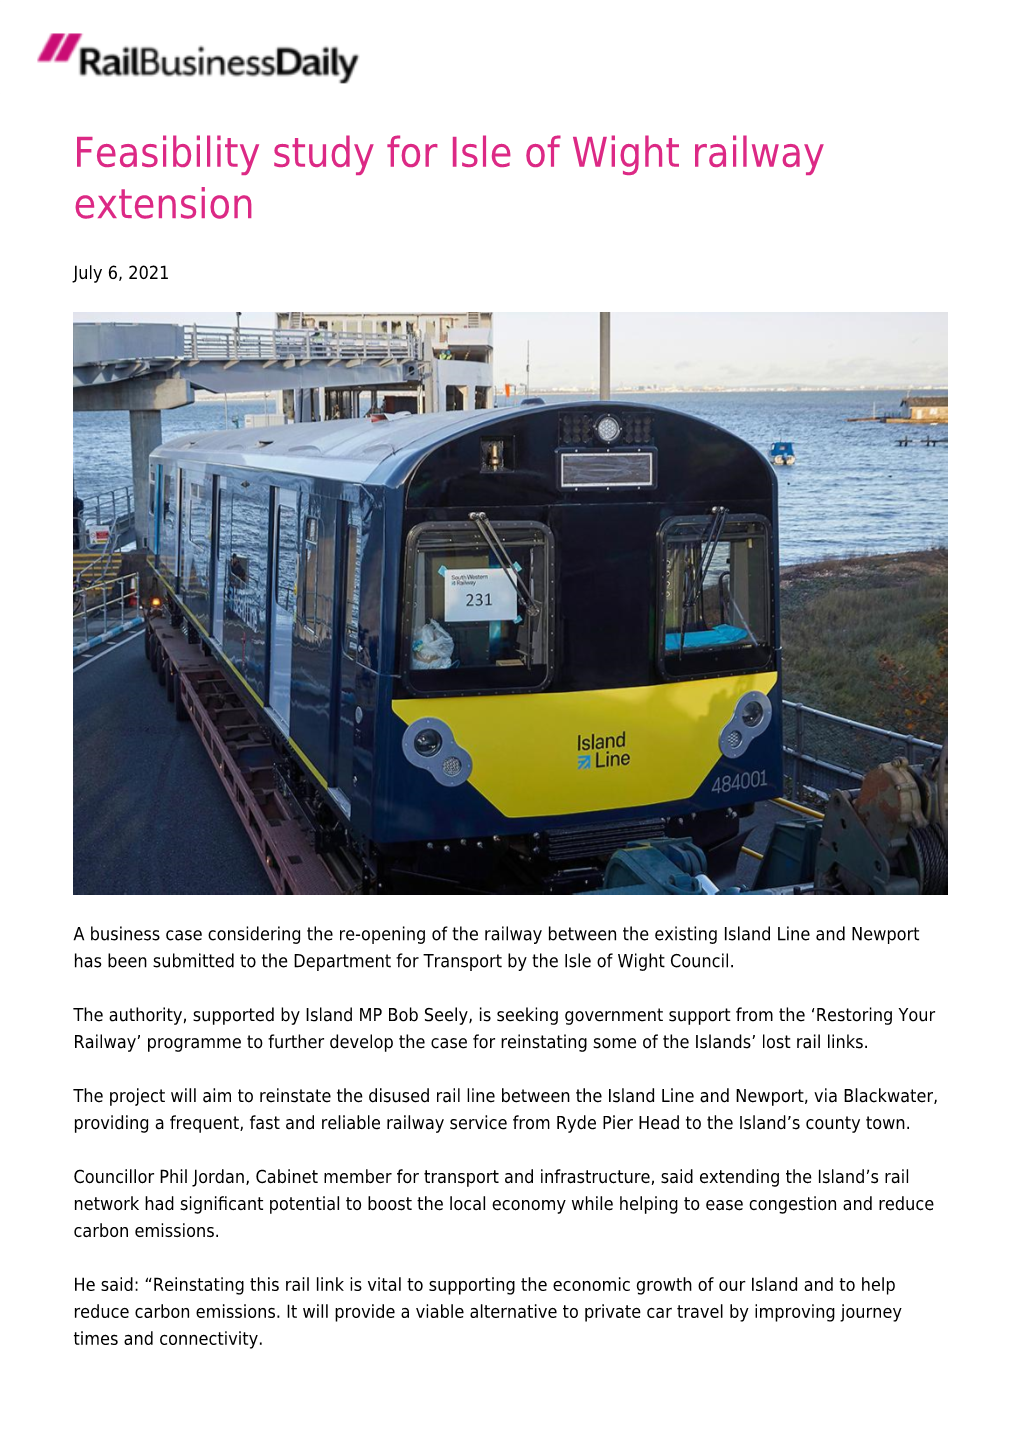 Feasibility Study for Isle of Wight Railway Extension